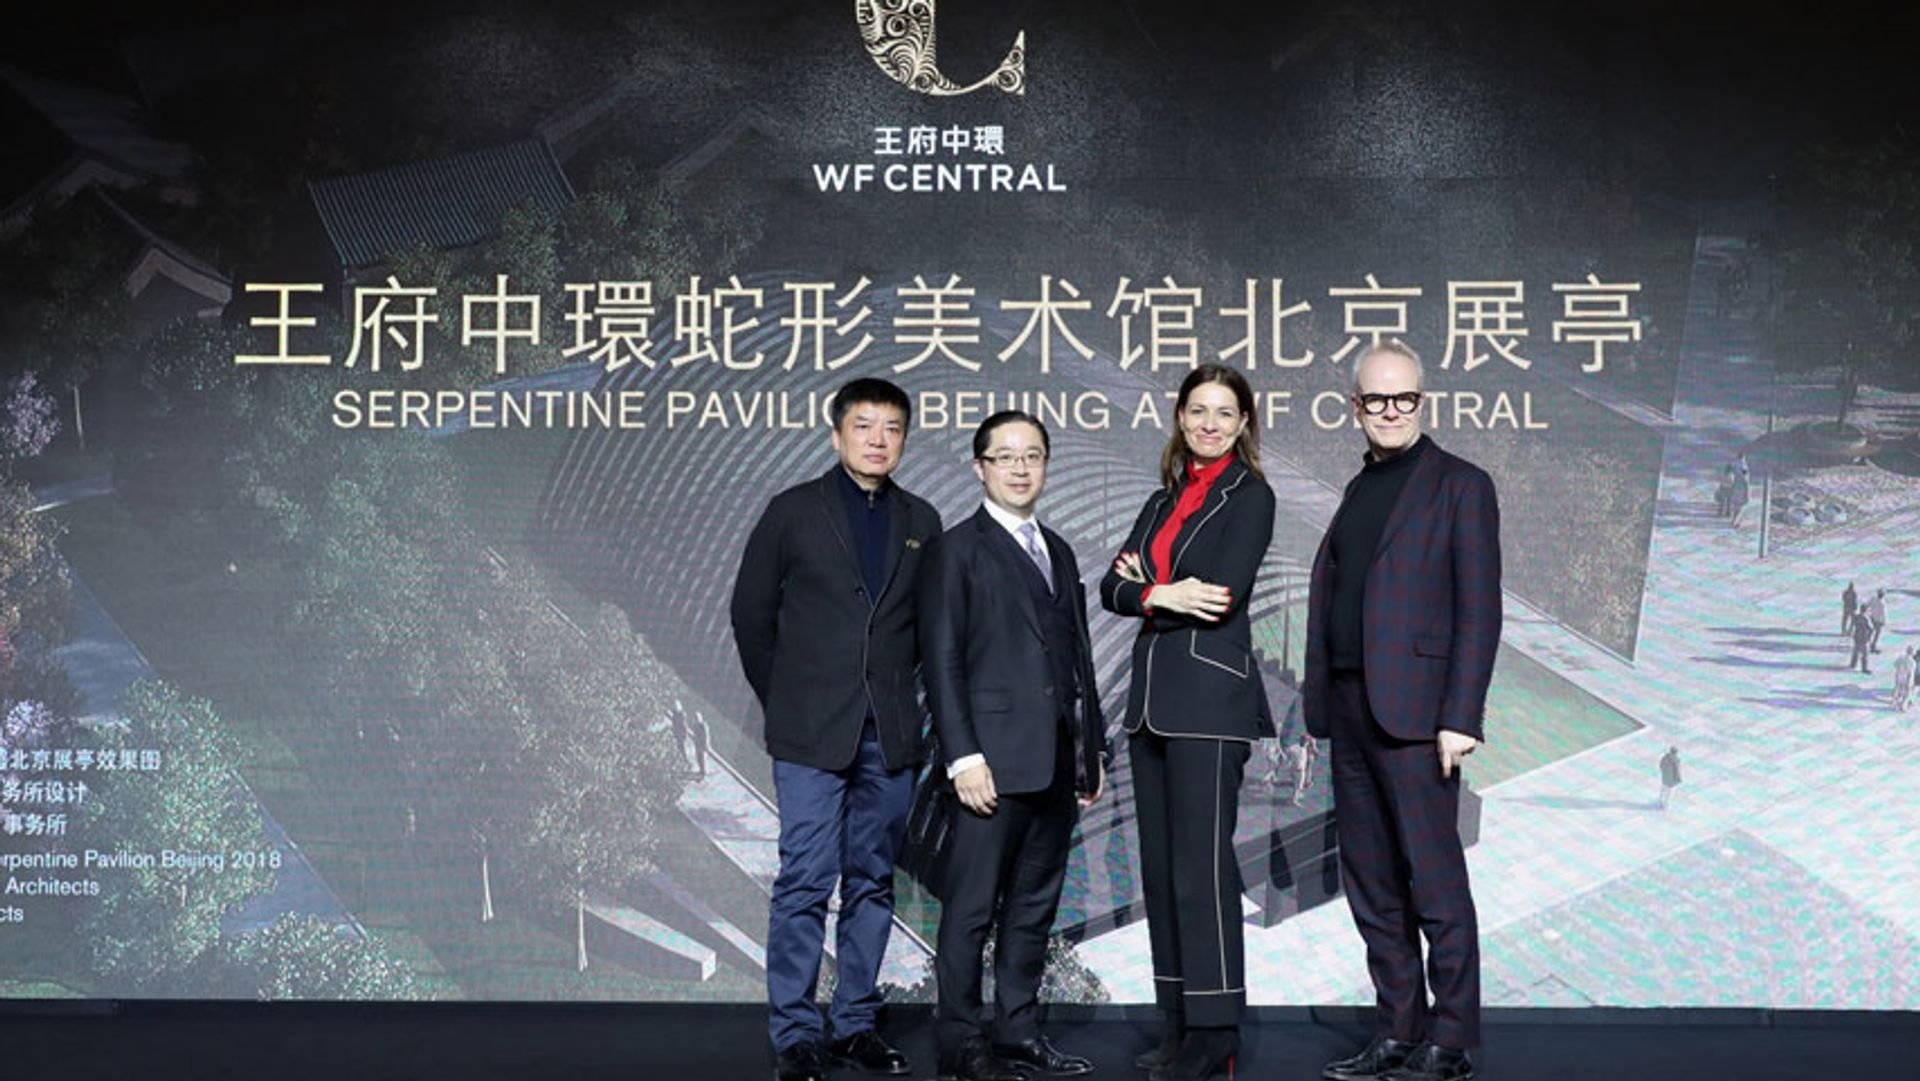 Jiakun artchitects, Yana Peel and Hans Ulrich Obrist at the annoucement of the Serpentine Pavilion Beijing Zhoupei